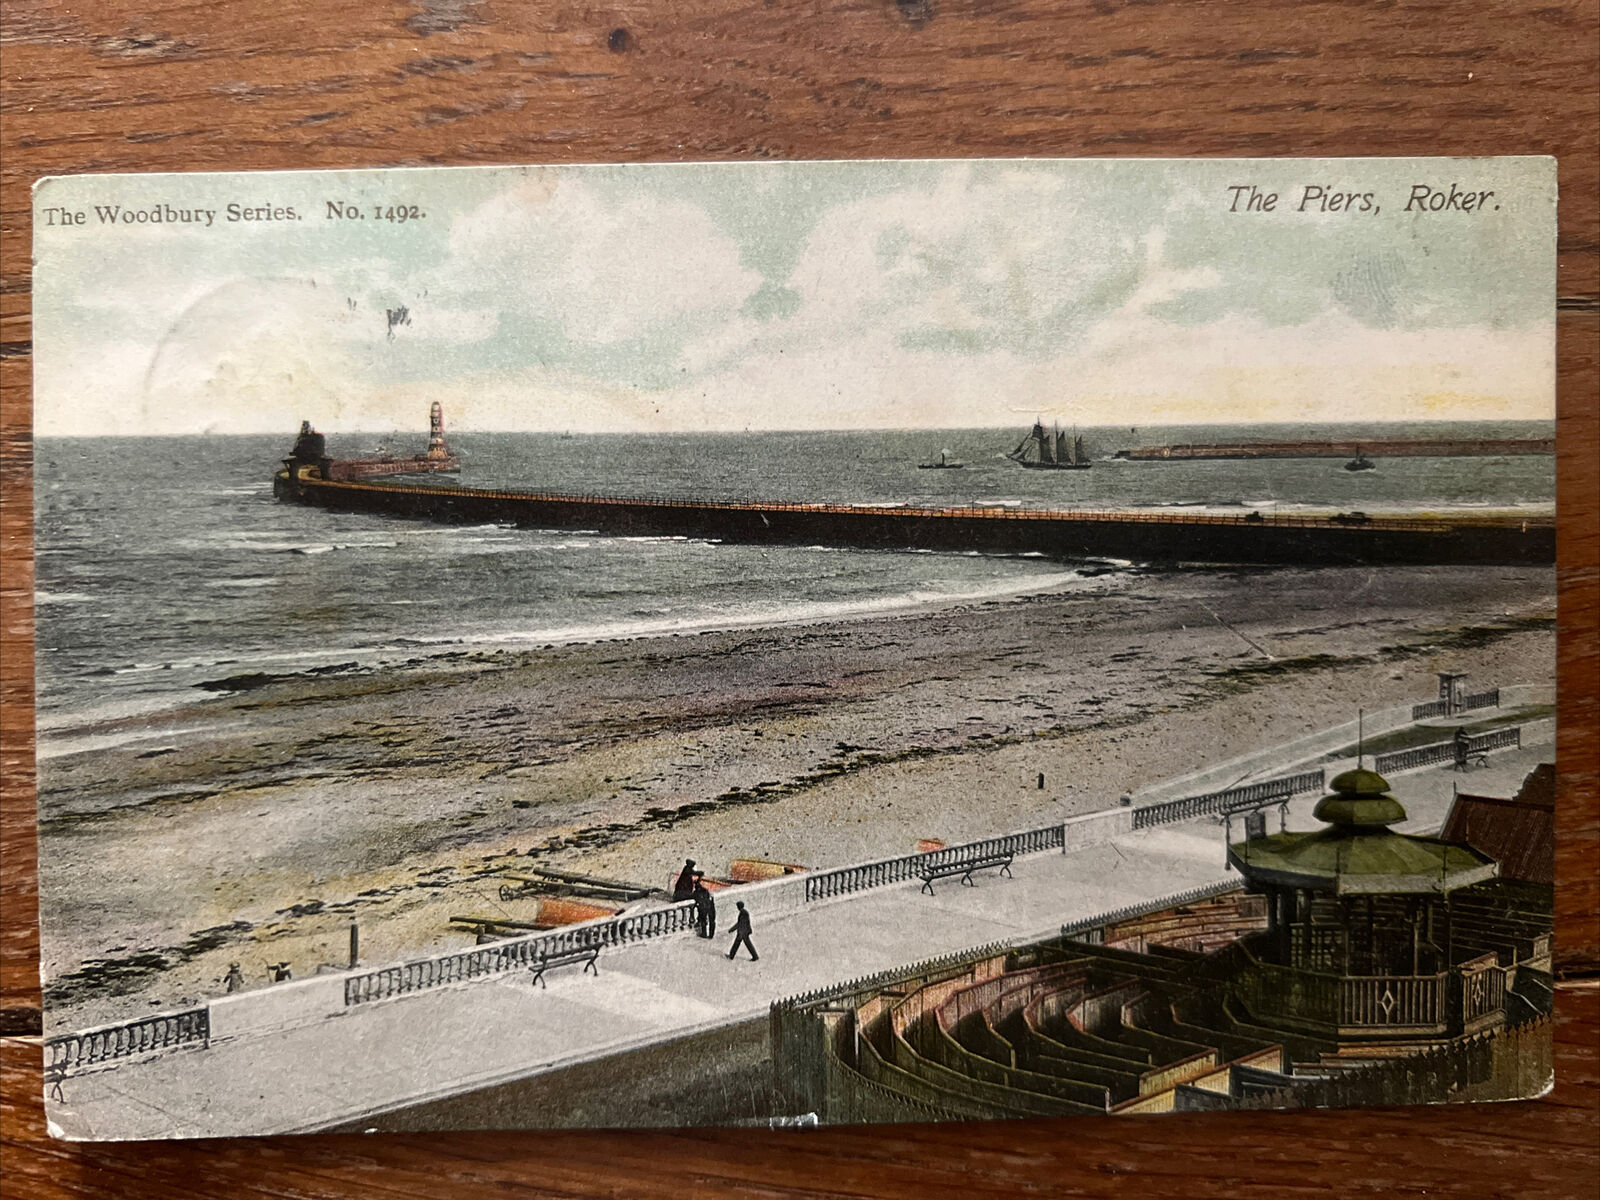 House Clearance - Service The Piers at Roker Sunderland 1908